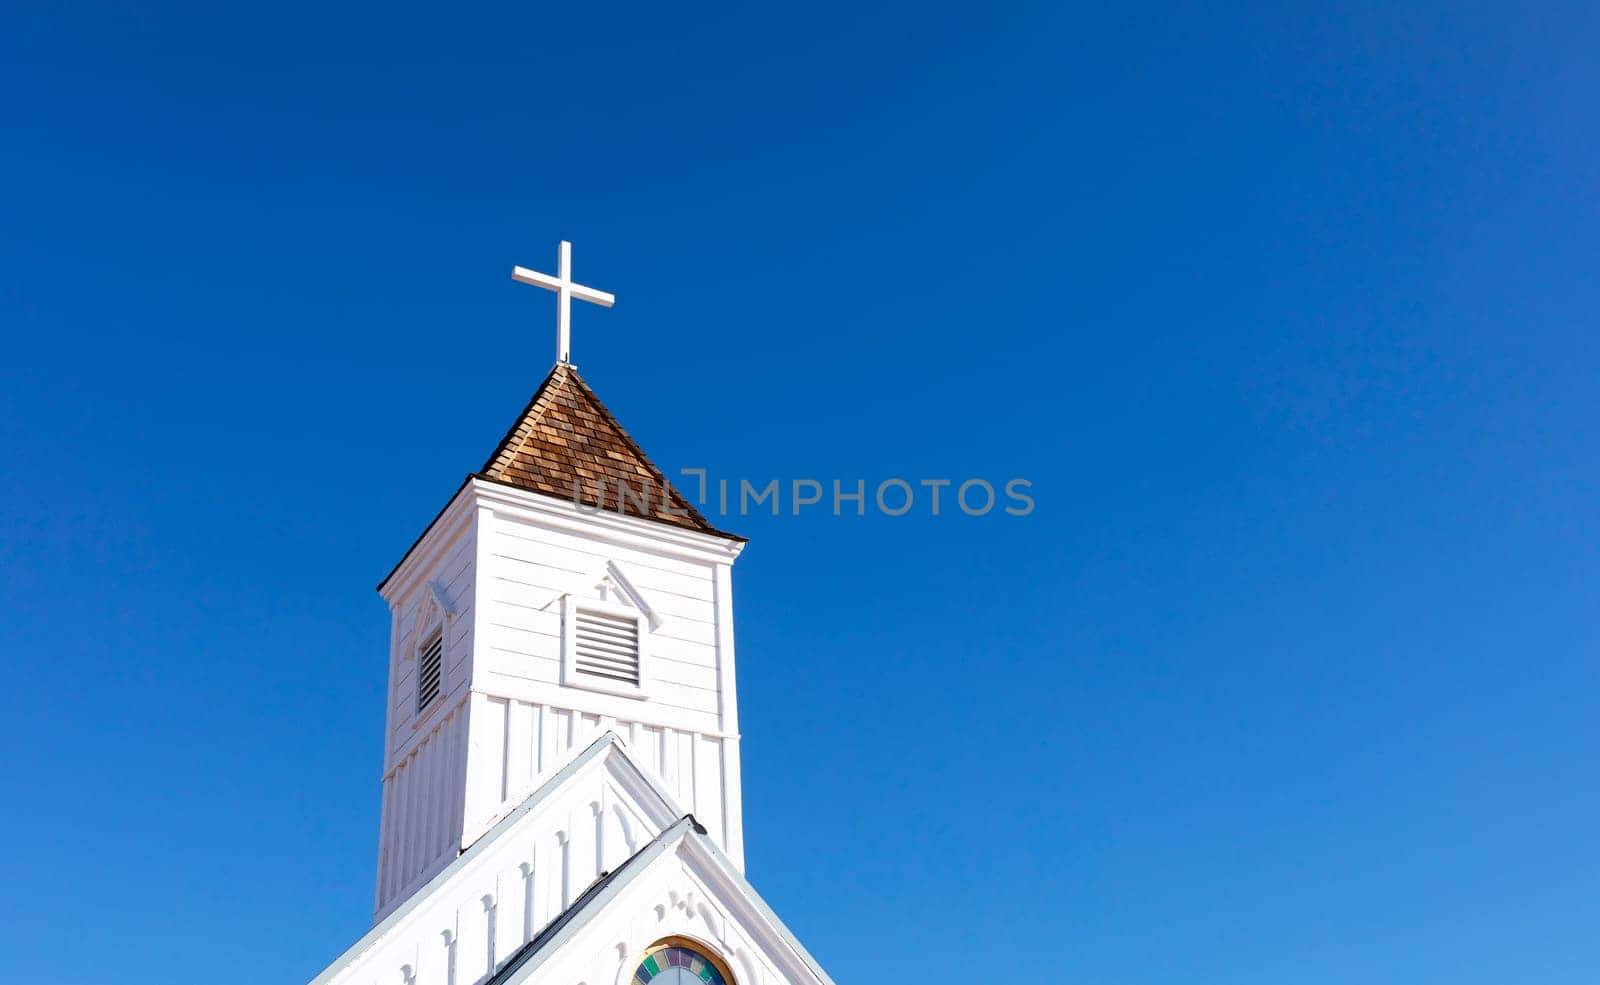 Wooden Church Steeple with Cross. White Old Church, Blue Sky On Background. Copy Space For Text. Christian Religious Holiday Easter or Radonitsa. Horizontal Plane by netatsi